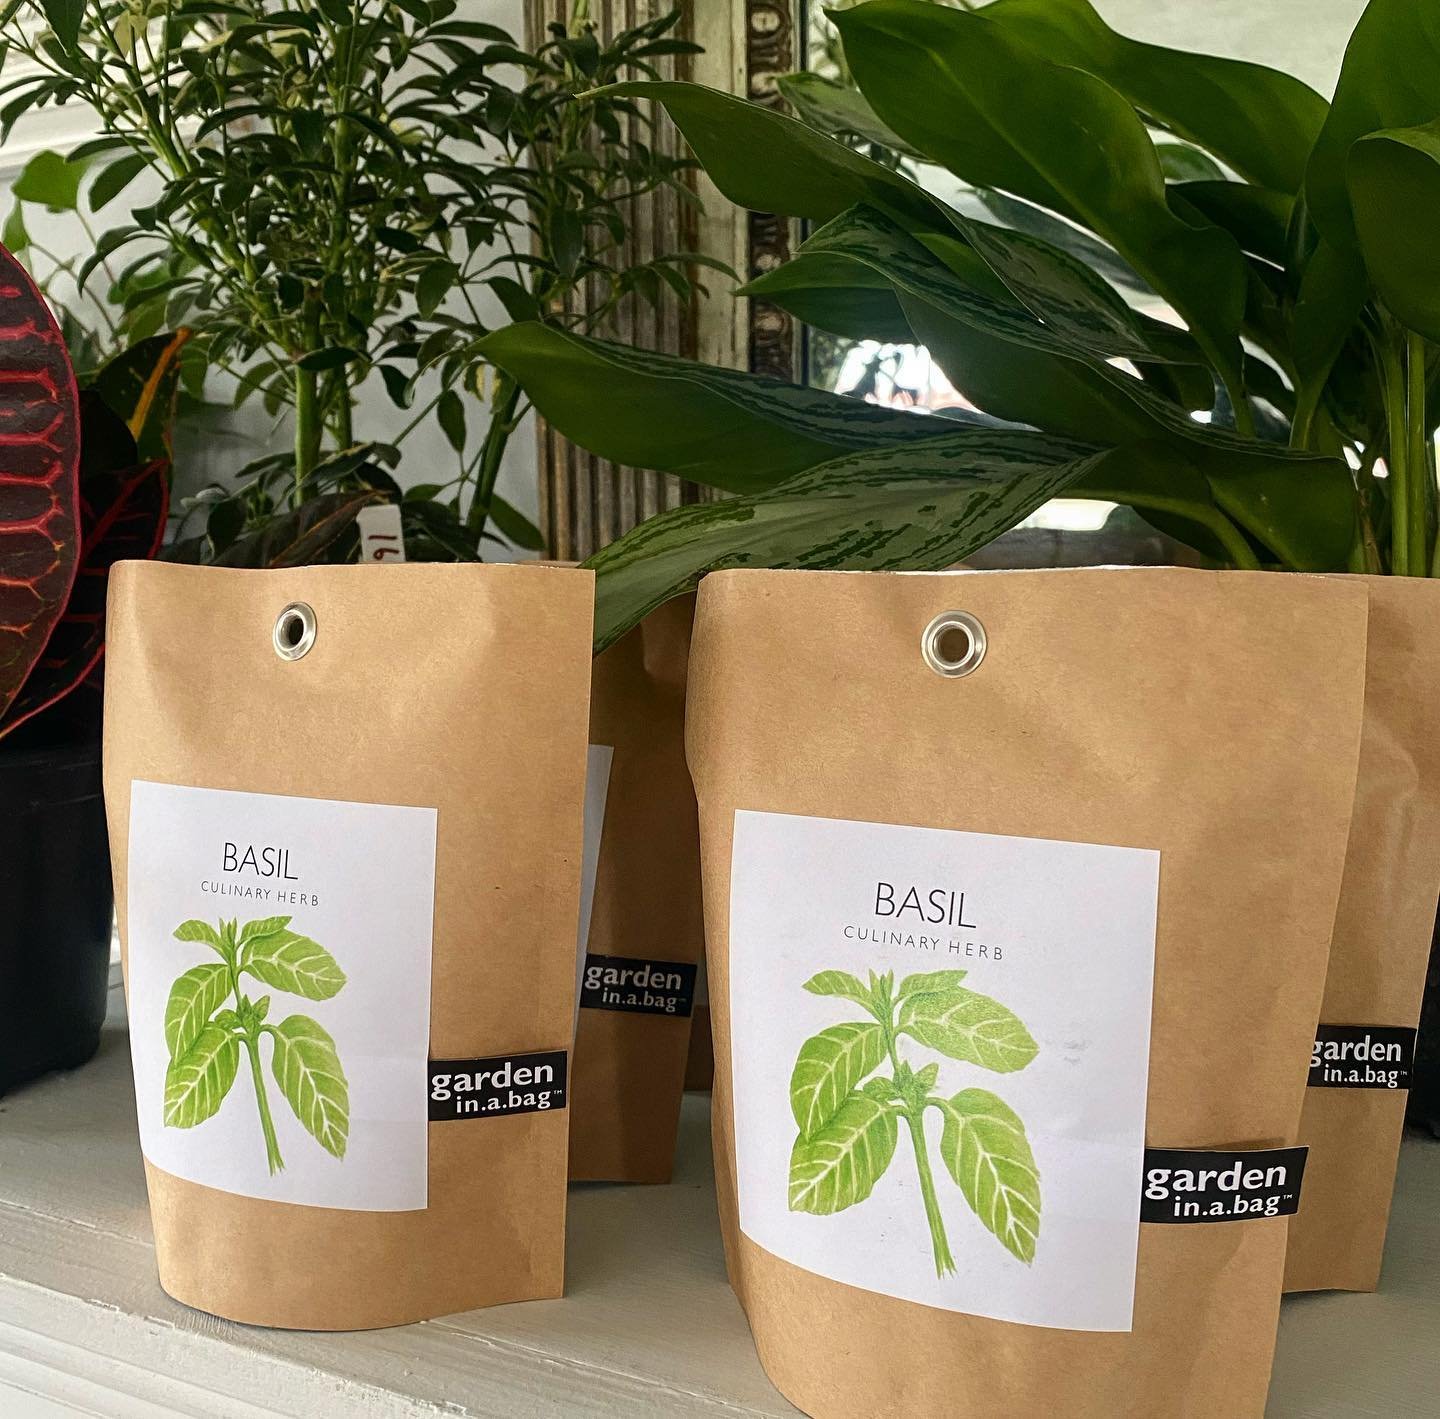 GARDEN IN A BAG! Now available at Blossom Nurseries 📍

Basil garden allows you to conveniently grow hearty, sweet smelling Basil all summer long, with no mess🌿

Moms garden will grow beautiful Zinnia flowers, the sweetest gift for Mother&rsquo;s Da